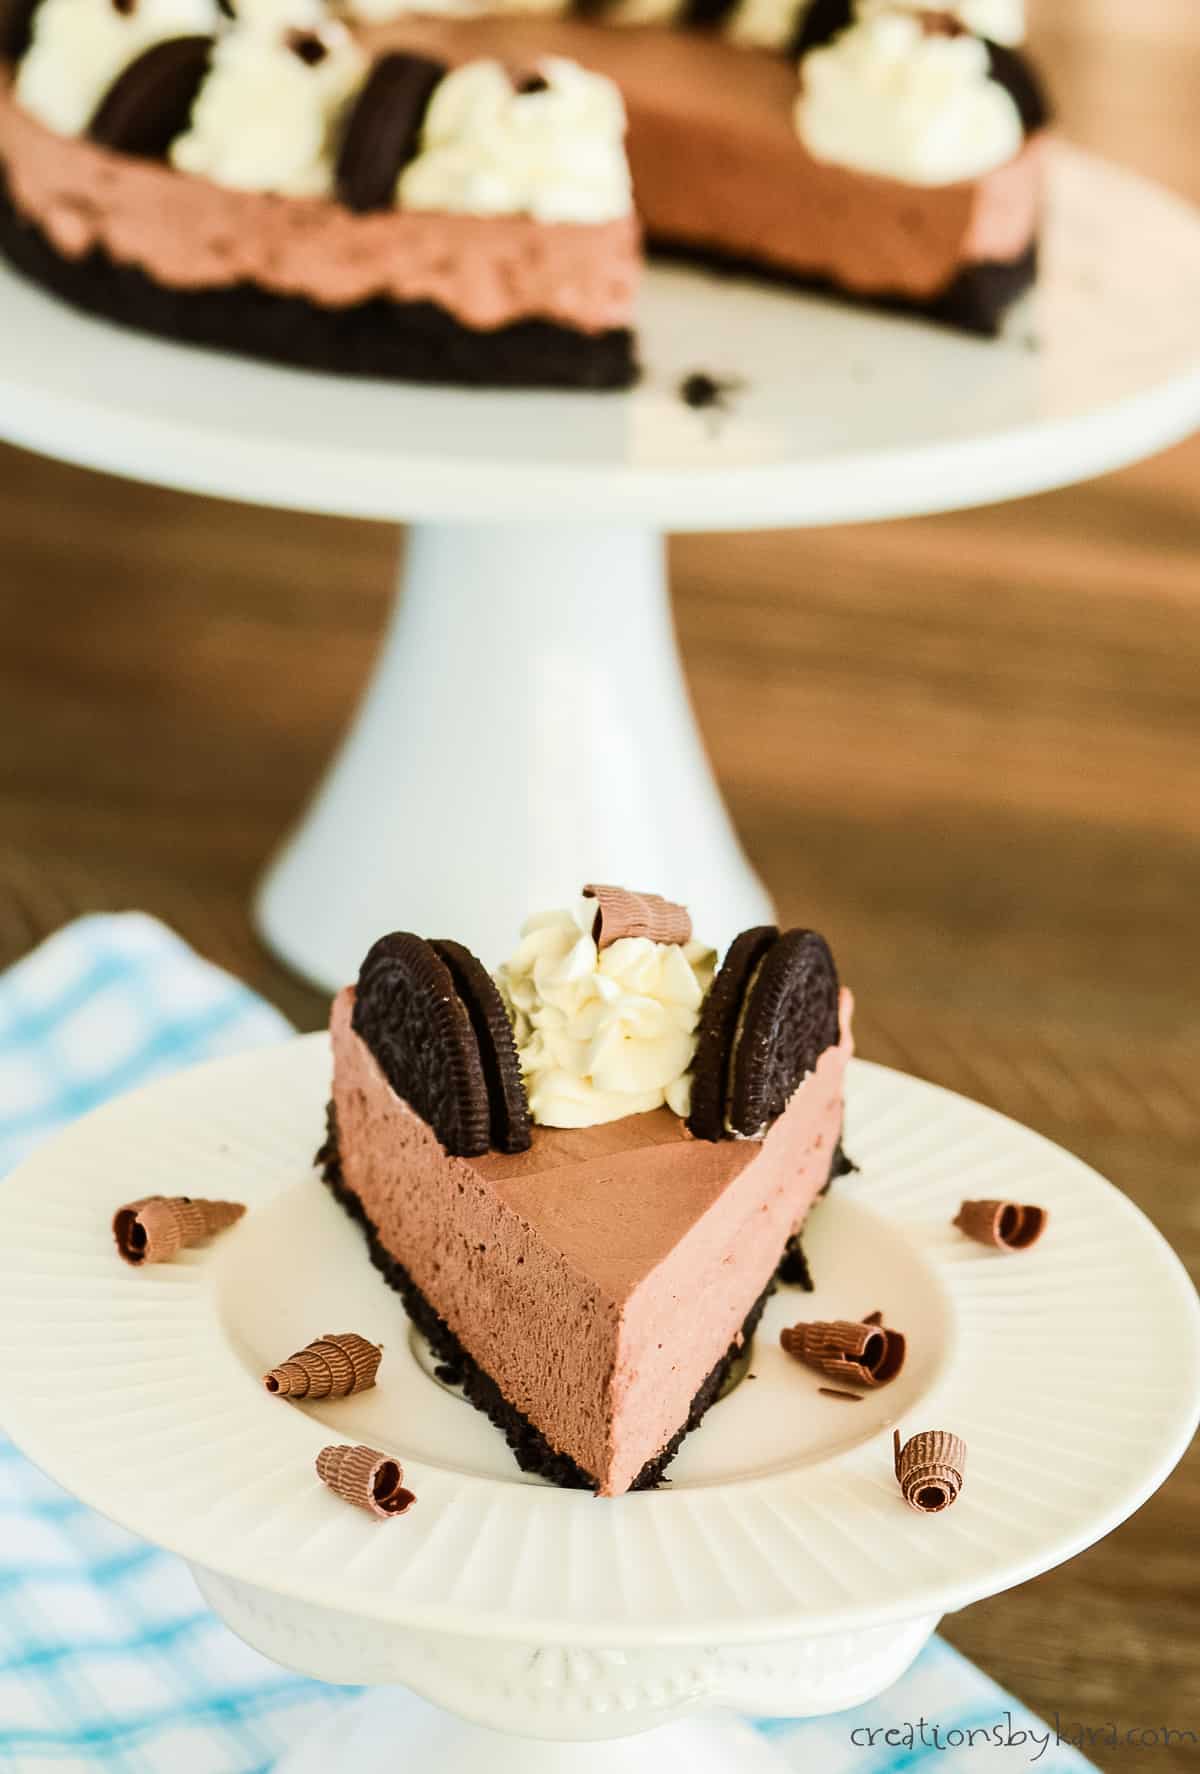 slice of chocolate mousse cake on a plate with a whole sliced cake in the background